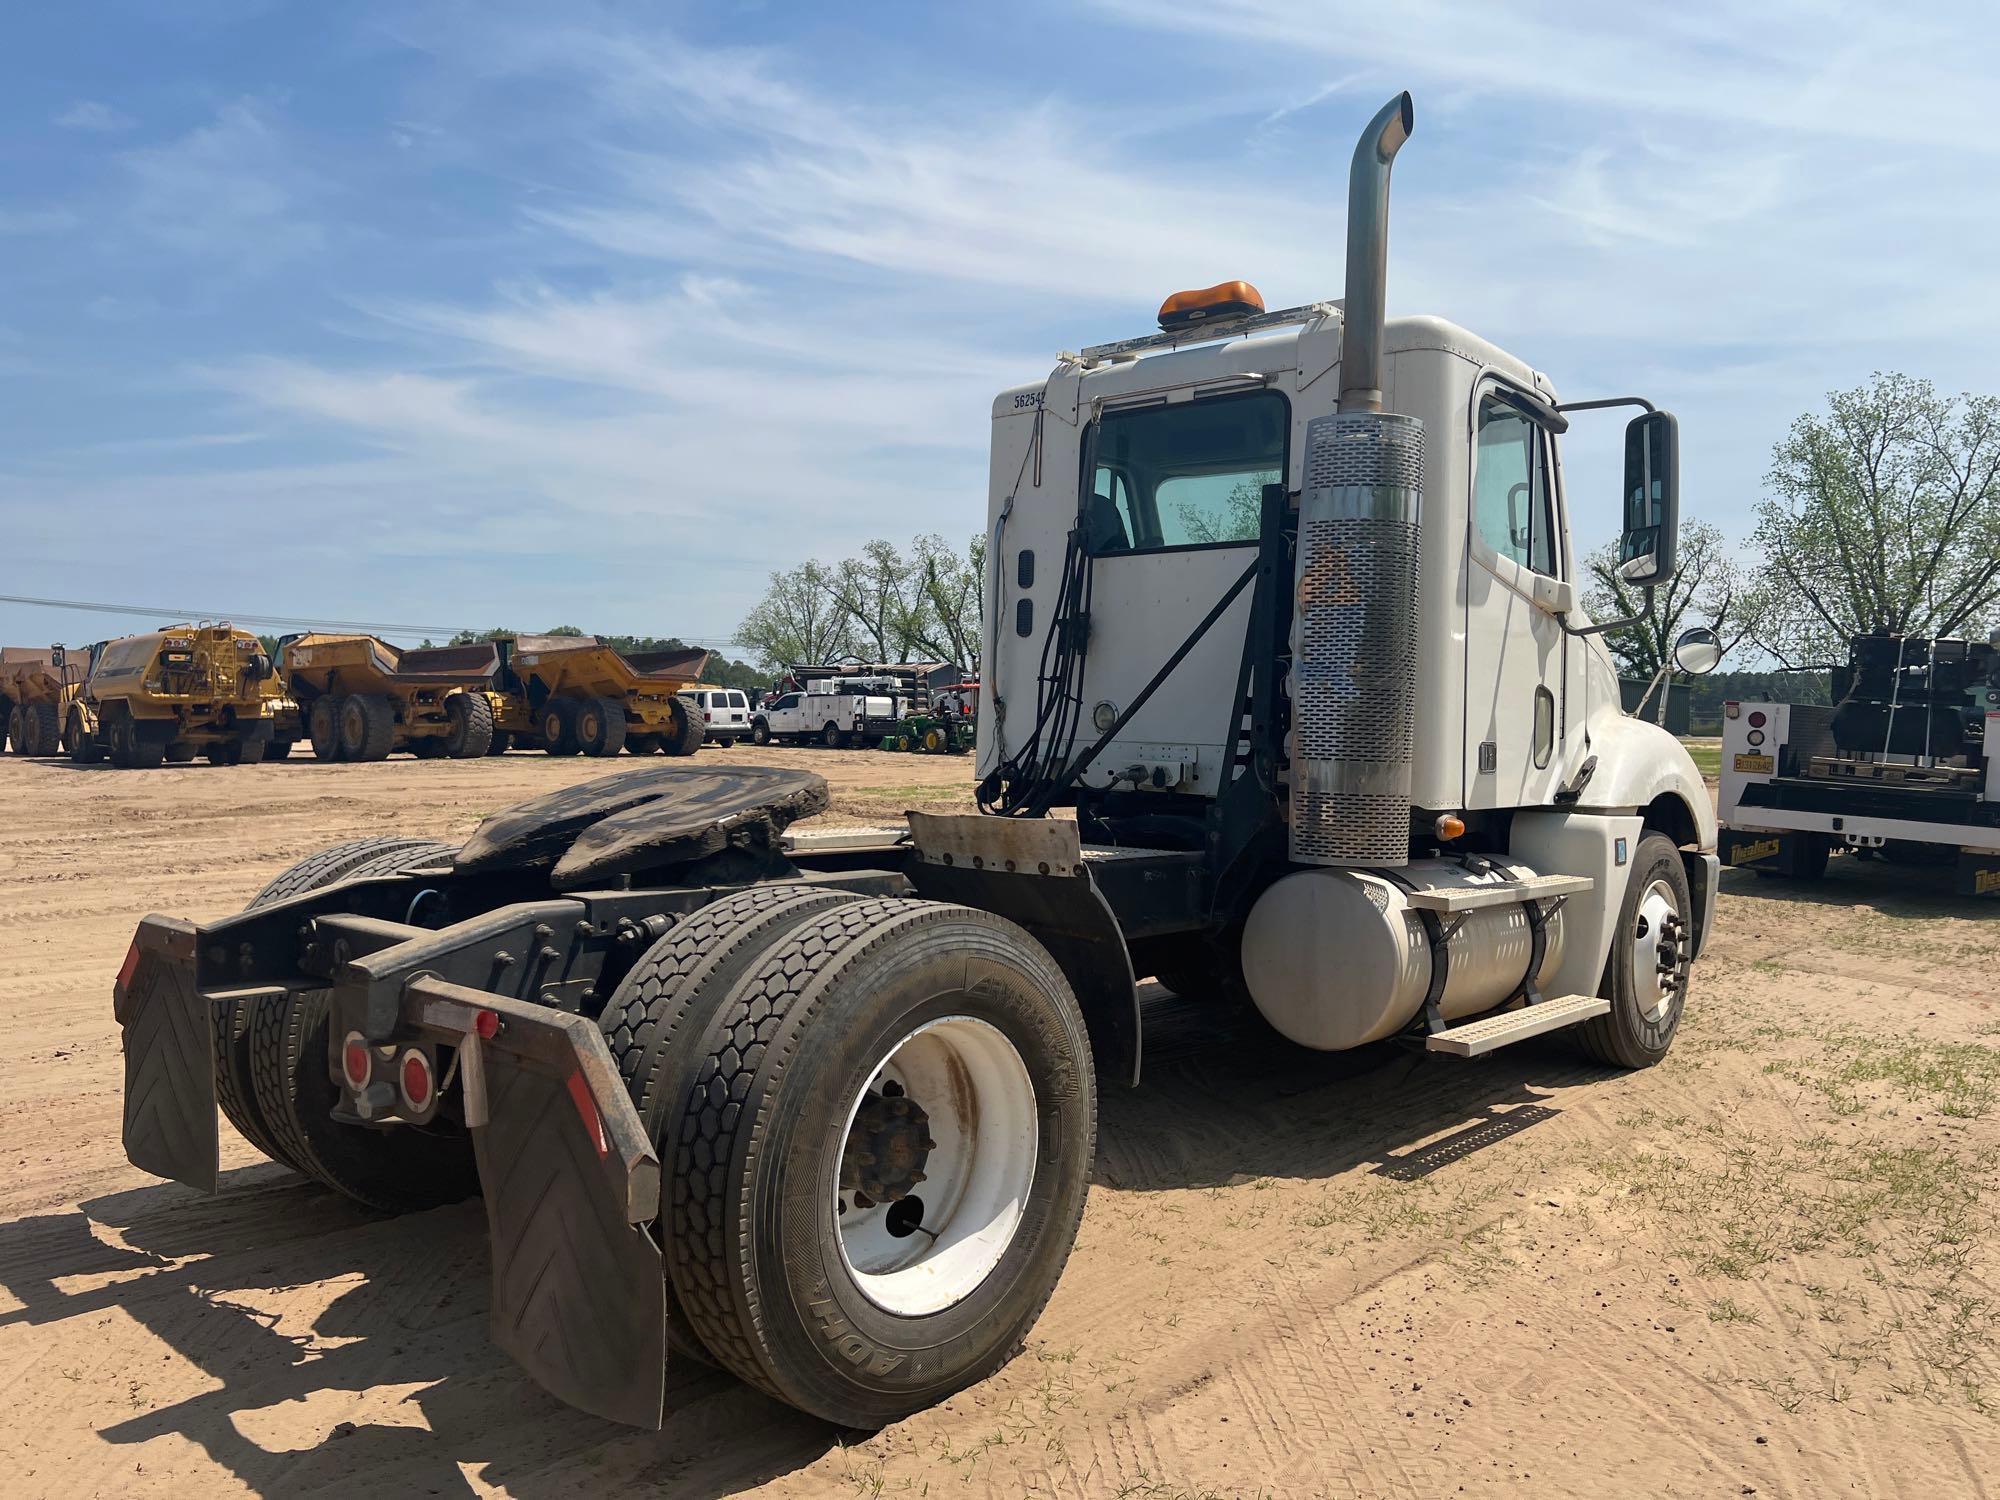 2009 FREIGHTLINER DAY CAB S/A ROAD TRACTOR